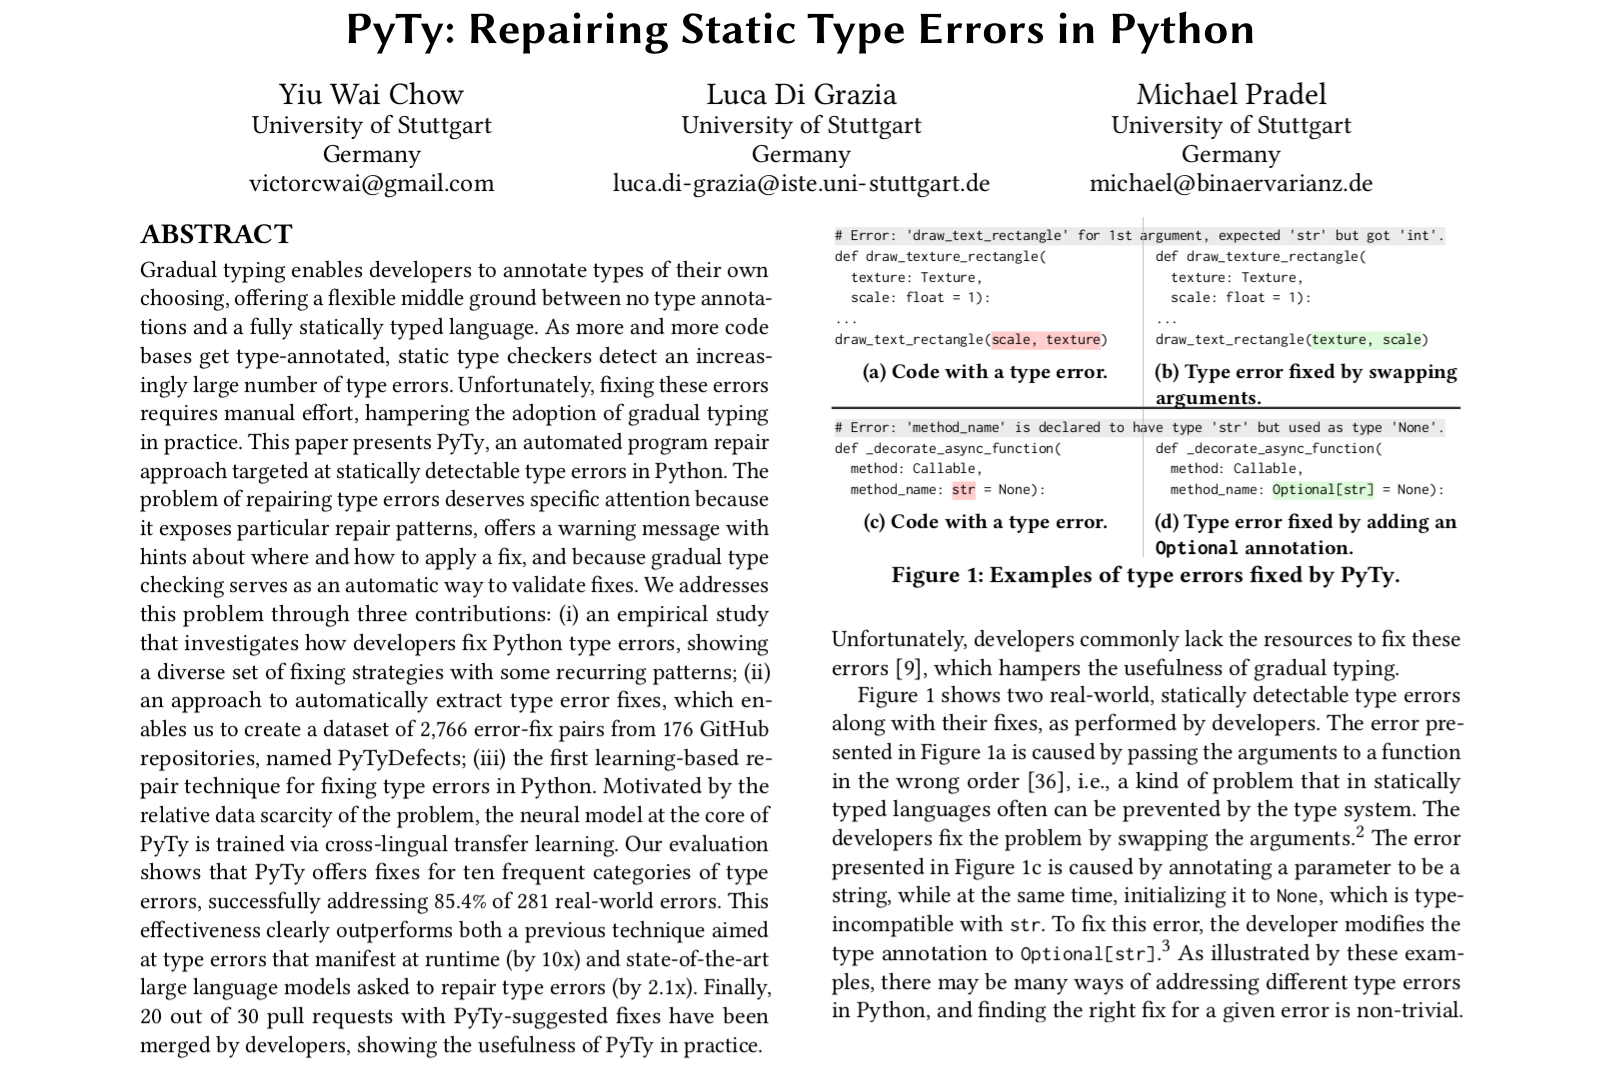 Finally, many developers seem to not regularly
            check their code for statically detectable type errors, or if they do,
            commit the code despite such errors.